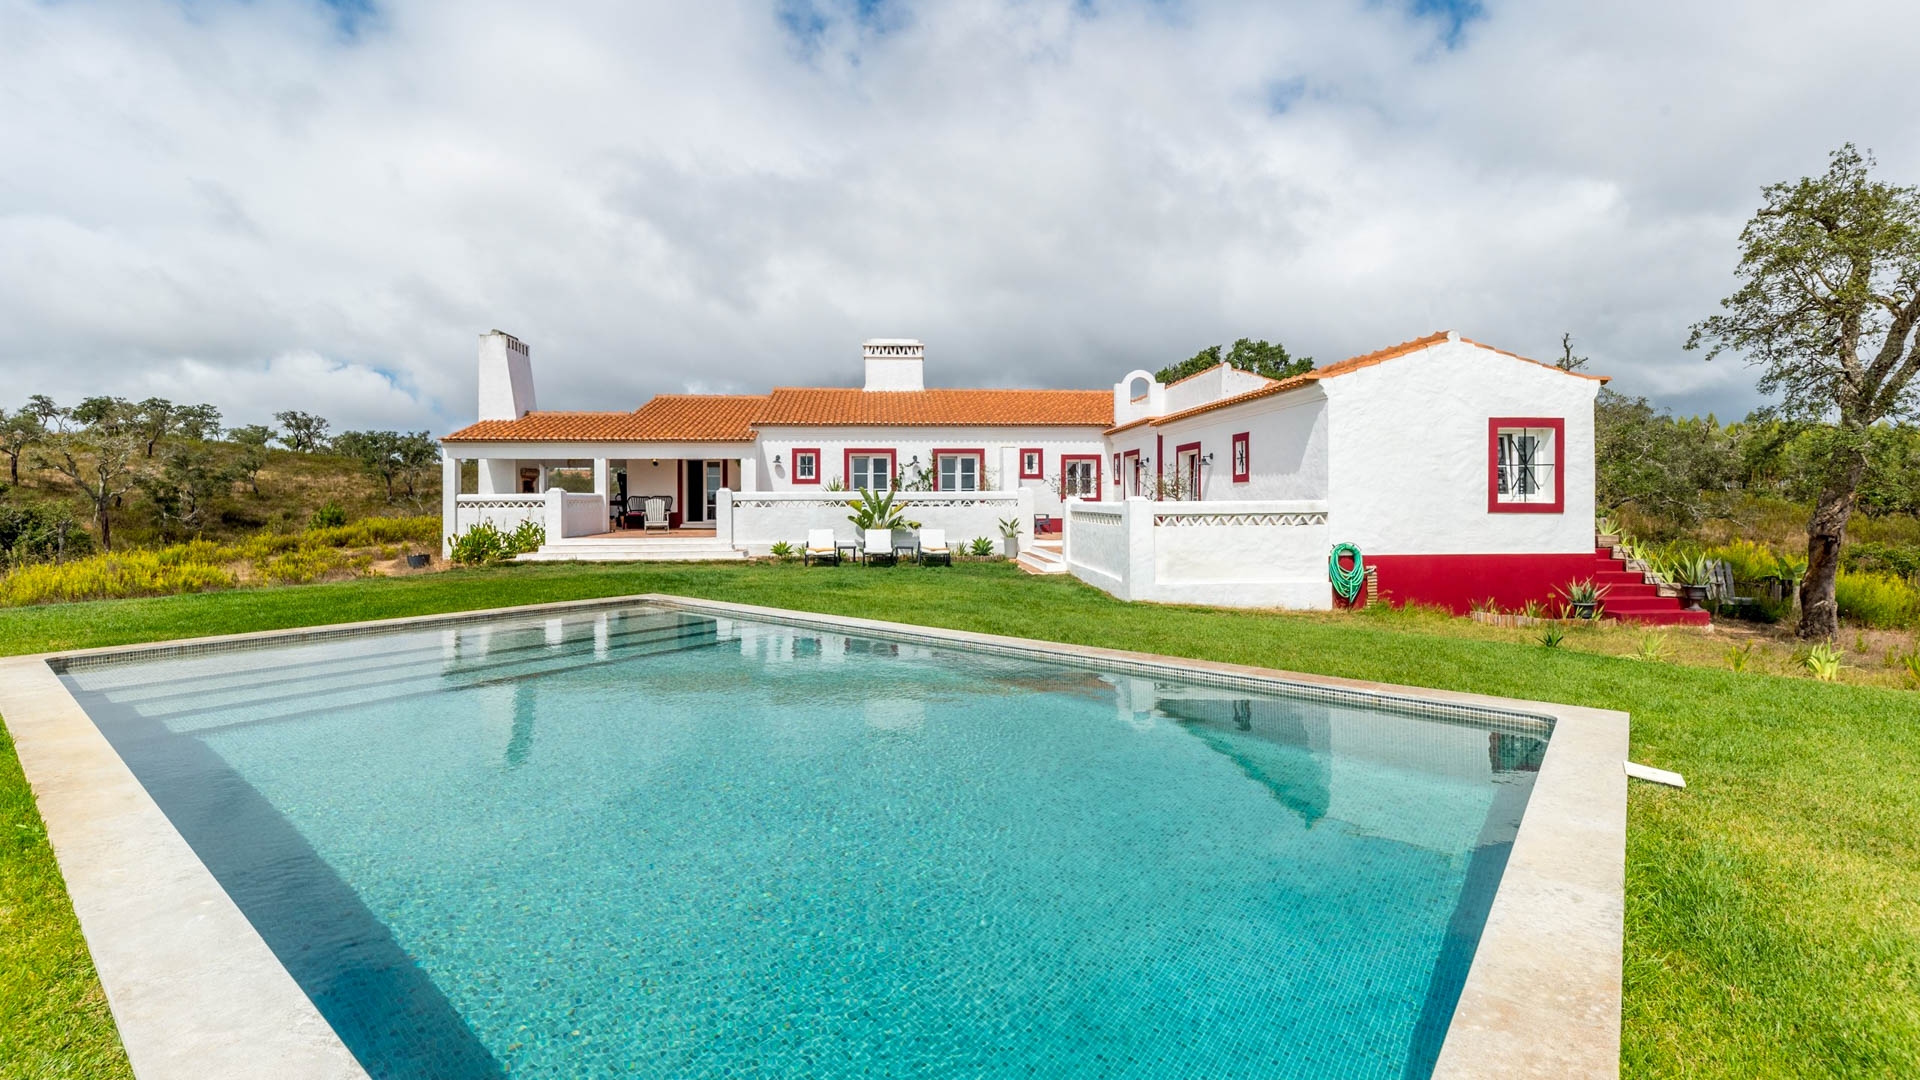 4 Bedroom Country House with Pool near Porto Covo and not far from Sines | PDB1956 